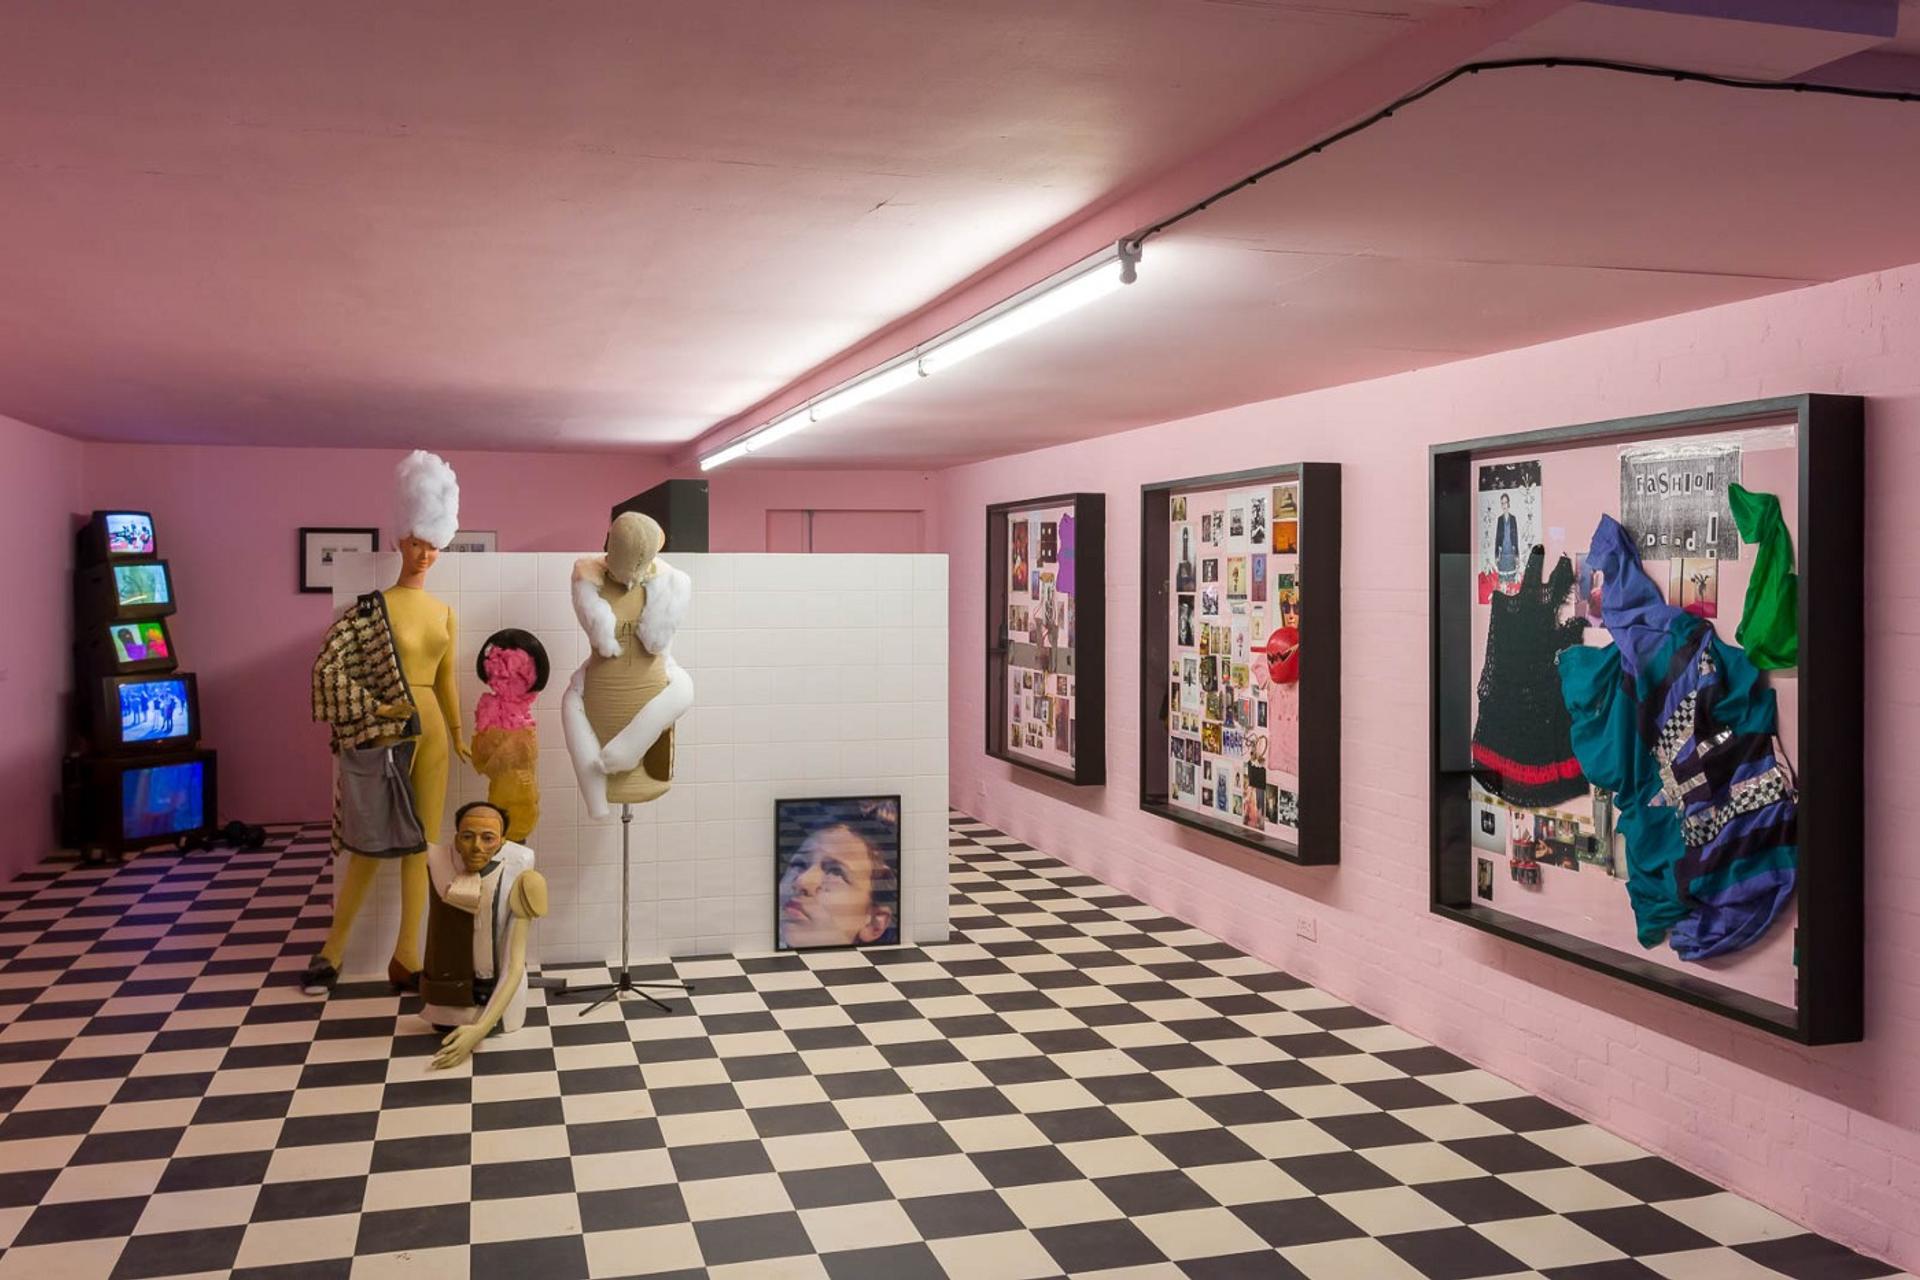 Honey-Suckle Company installation view, highlighting the ICA's divine floor tiles and pink walls.